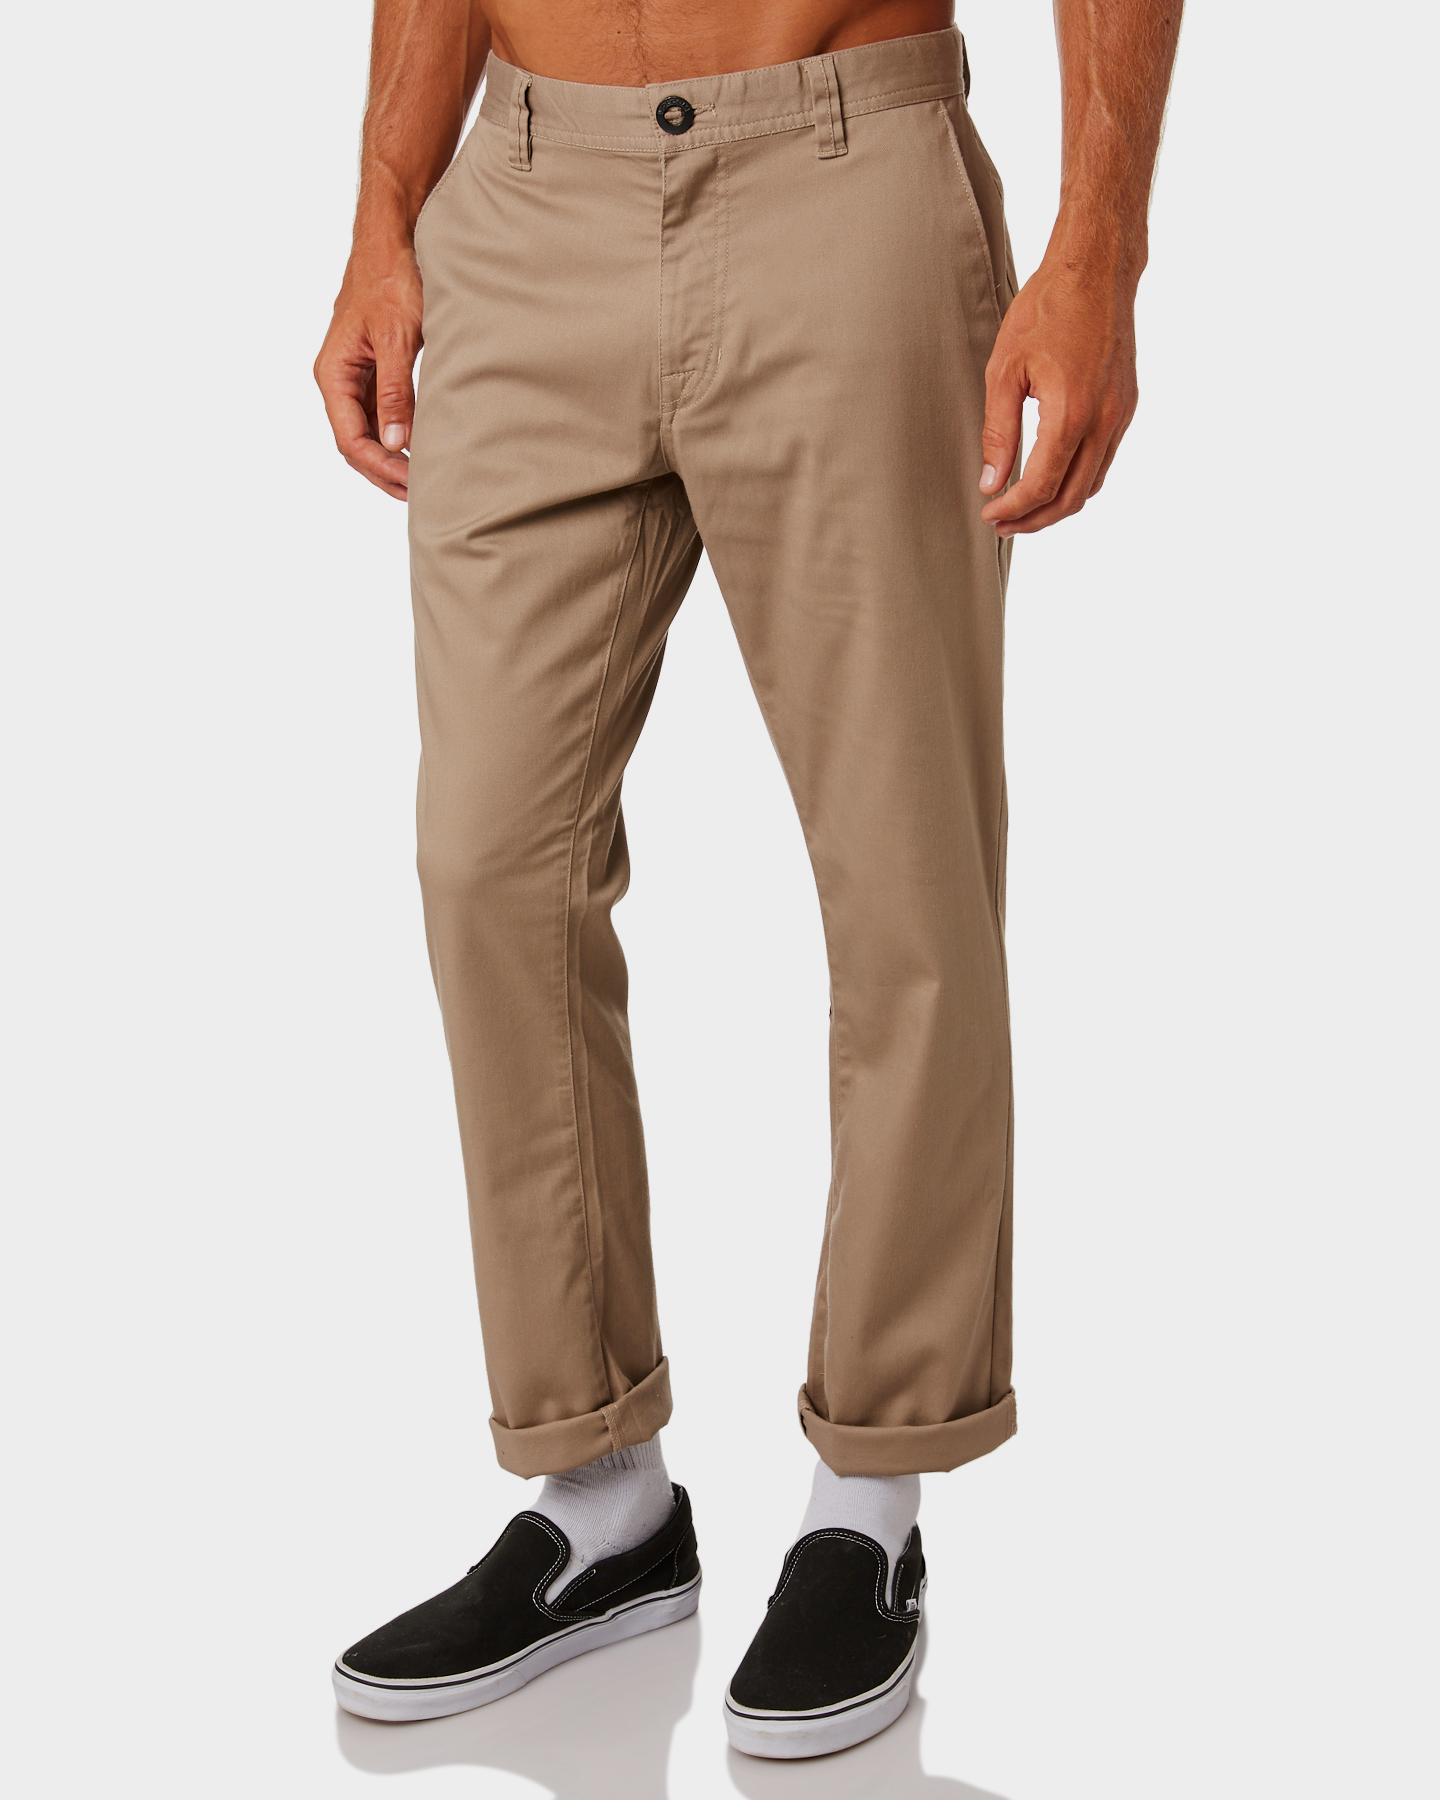 Different ones Kinds of Mens Pants – Telegraph